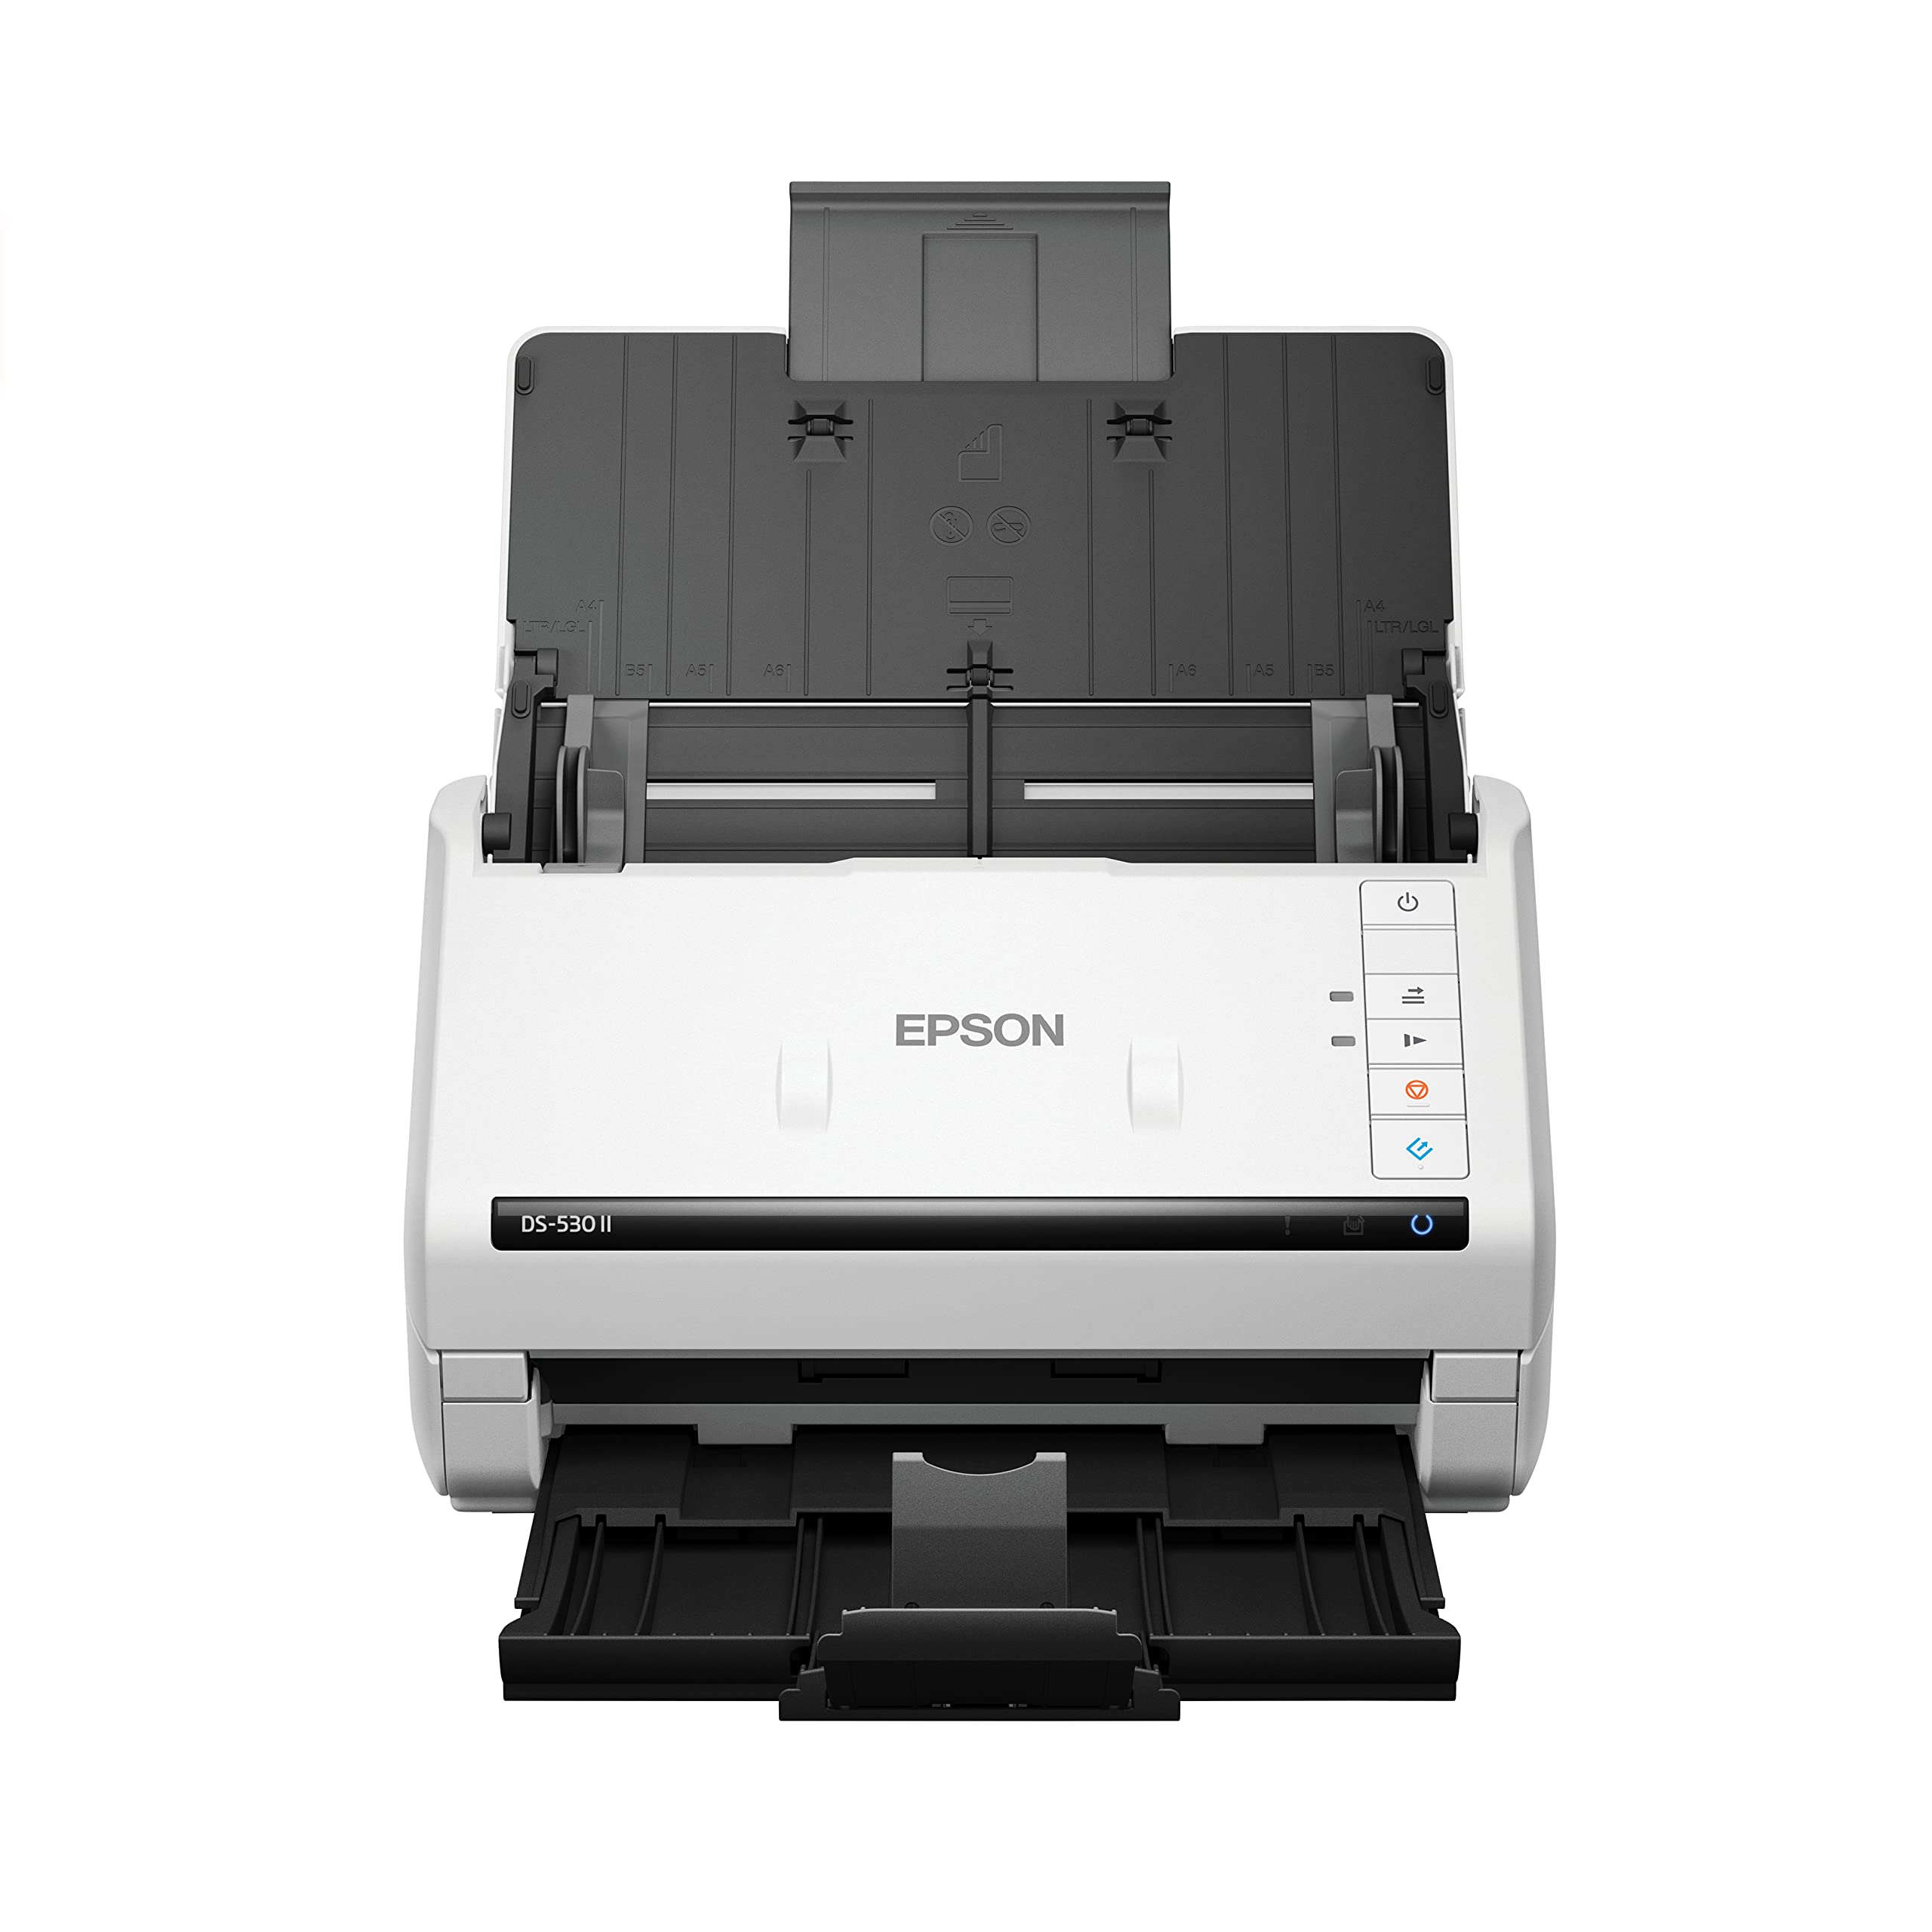 Epson DS-530 II Color Duplex Document Scanner for PC an...